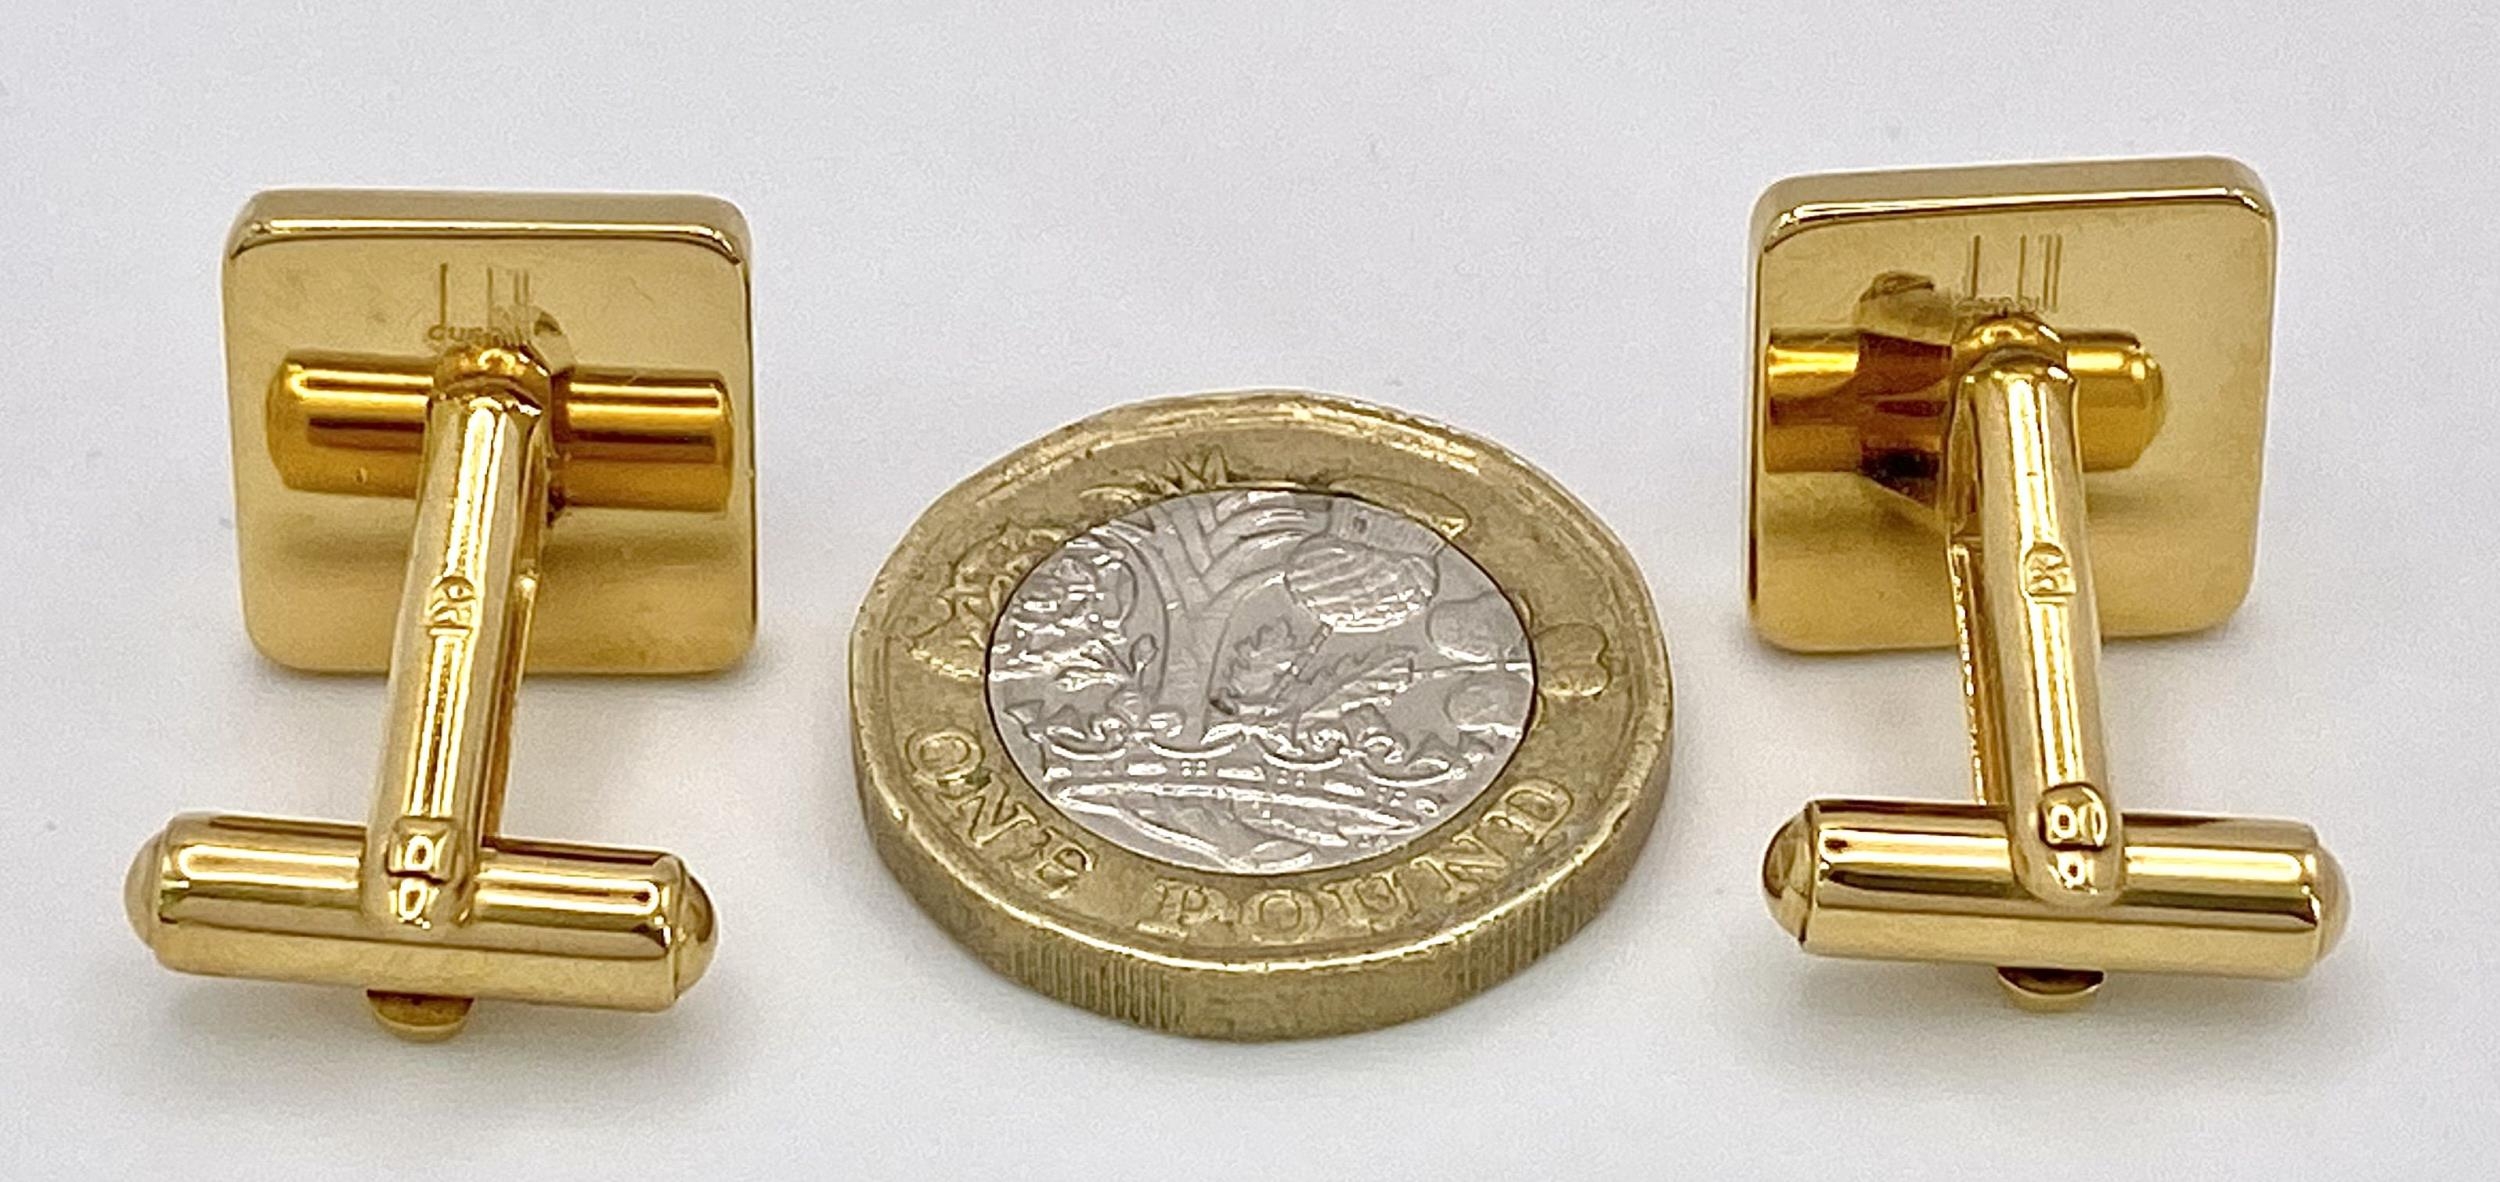 An Excellent Condition Pair of Square Yellow Gold Gilt Tortoiseshell Cufflinks by Dunhill in their - Image 7 of 9